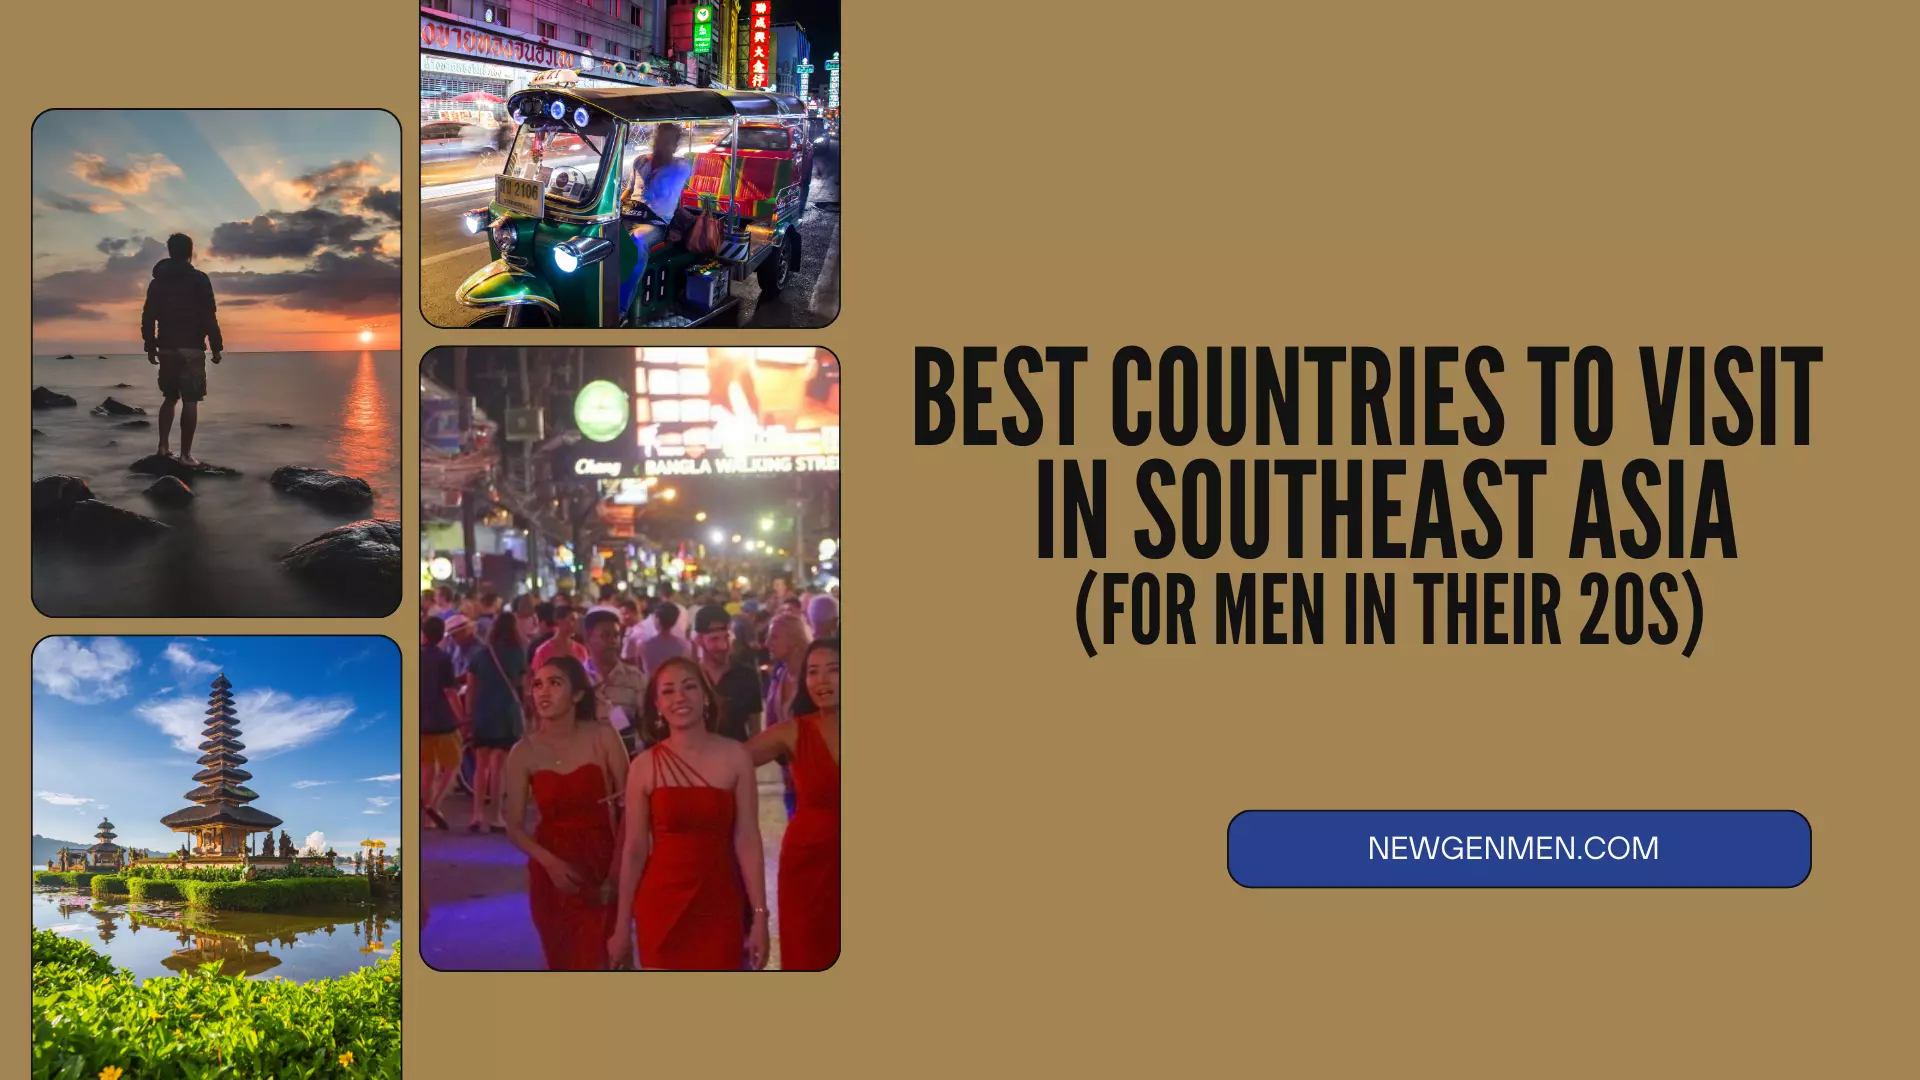 10 Best Countries To Visit In Southeast Asia For Men In Their 20s